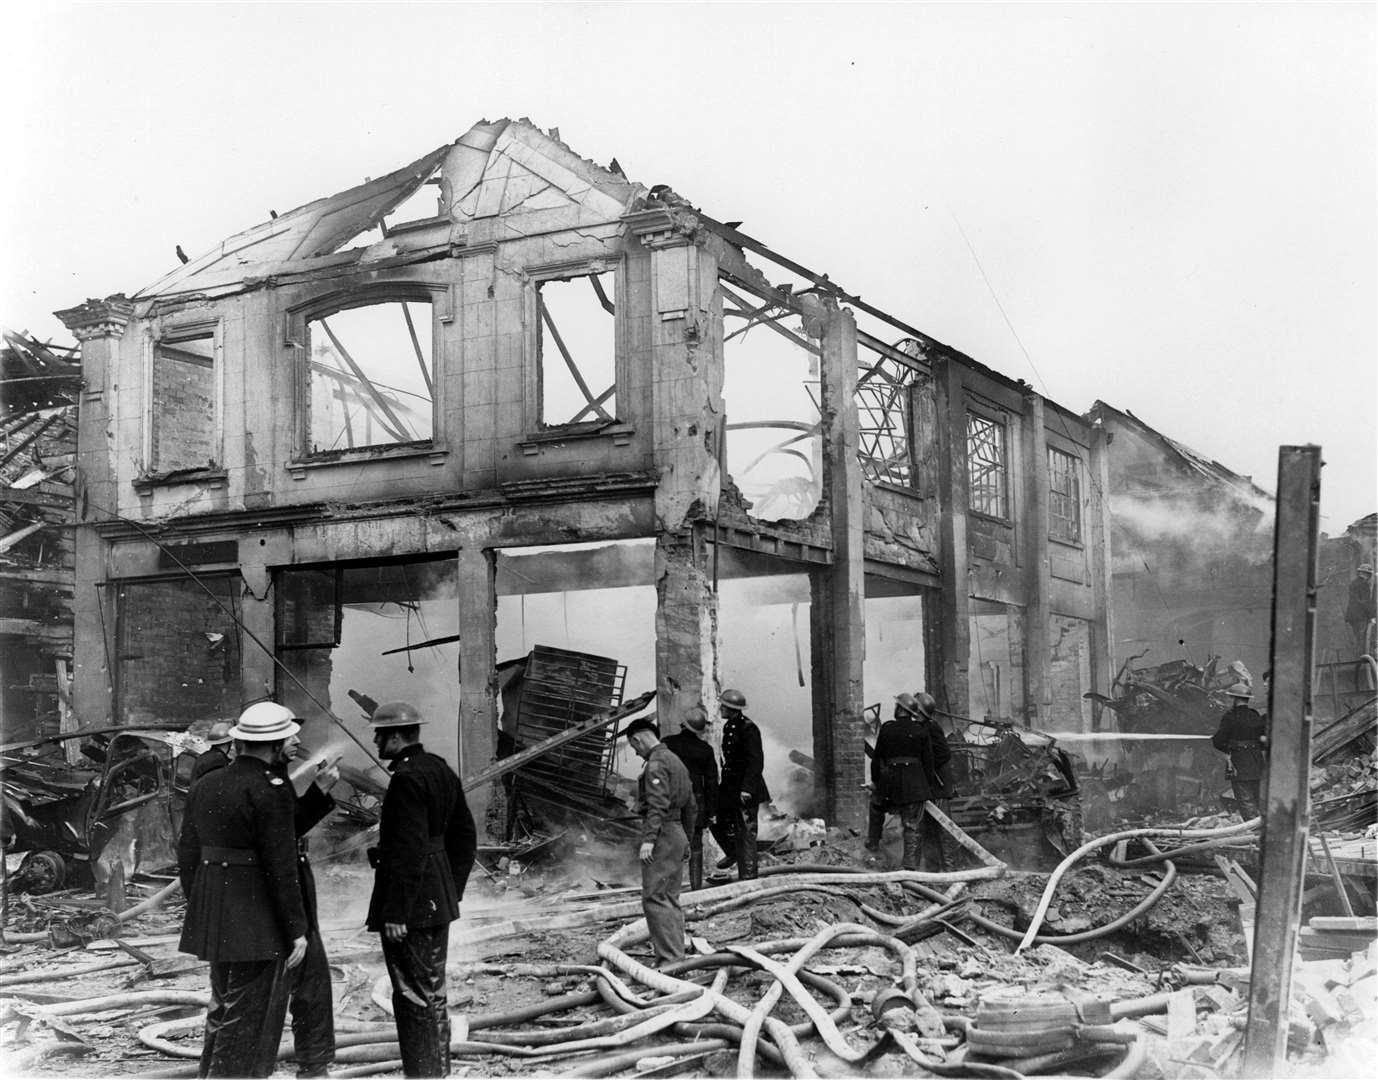 Mr Swan remembers the 1943 bombing. Picture: Steve Salter archive